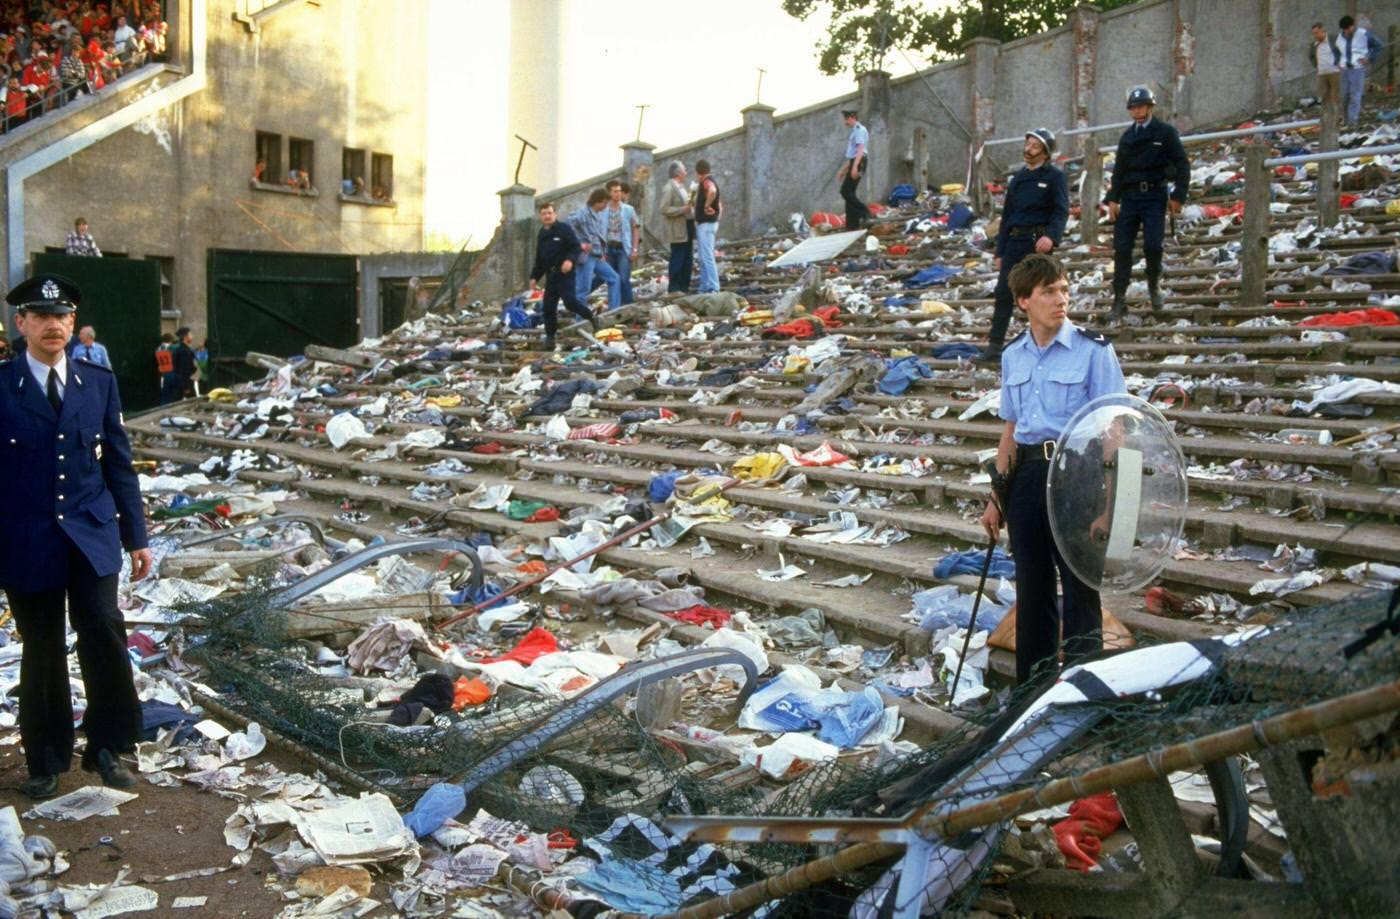 Ground staff clear aftermath of Heysel Stadium disaster, last European game for English clubs for 10 years, 1985.